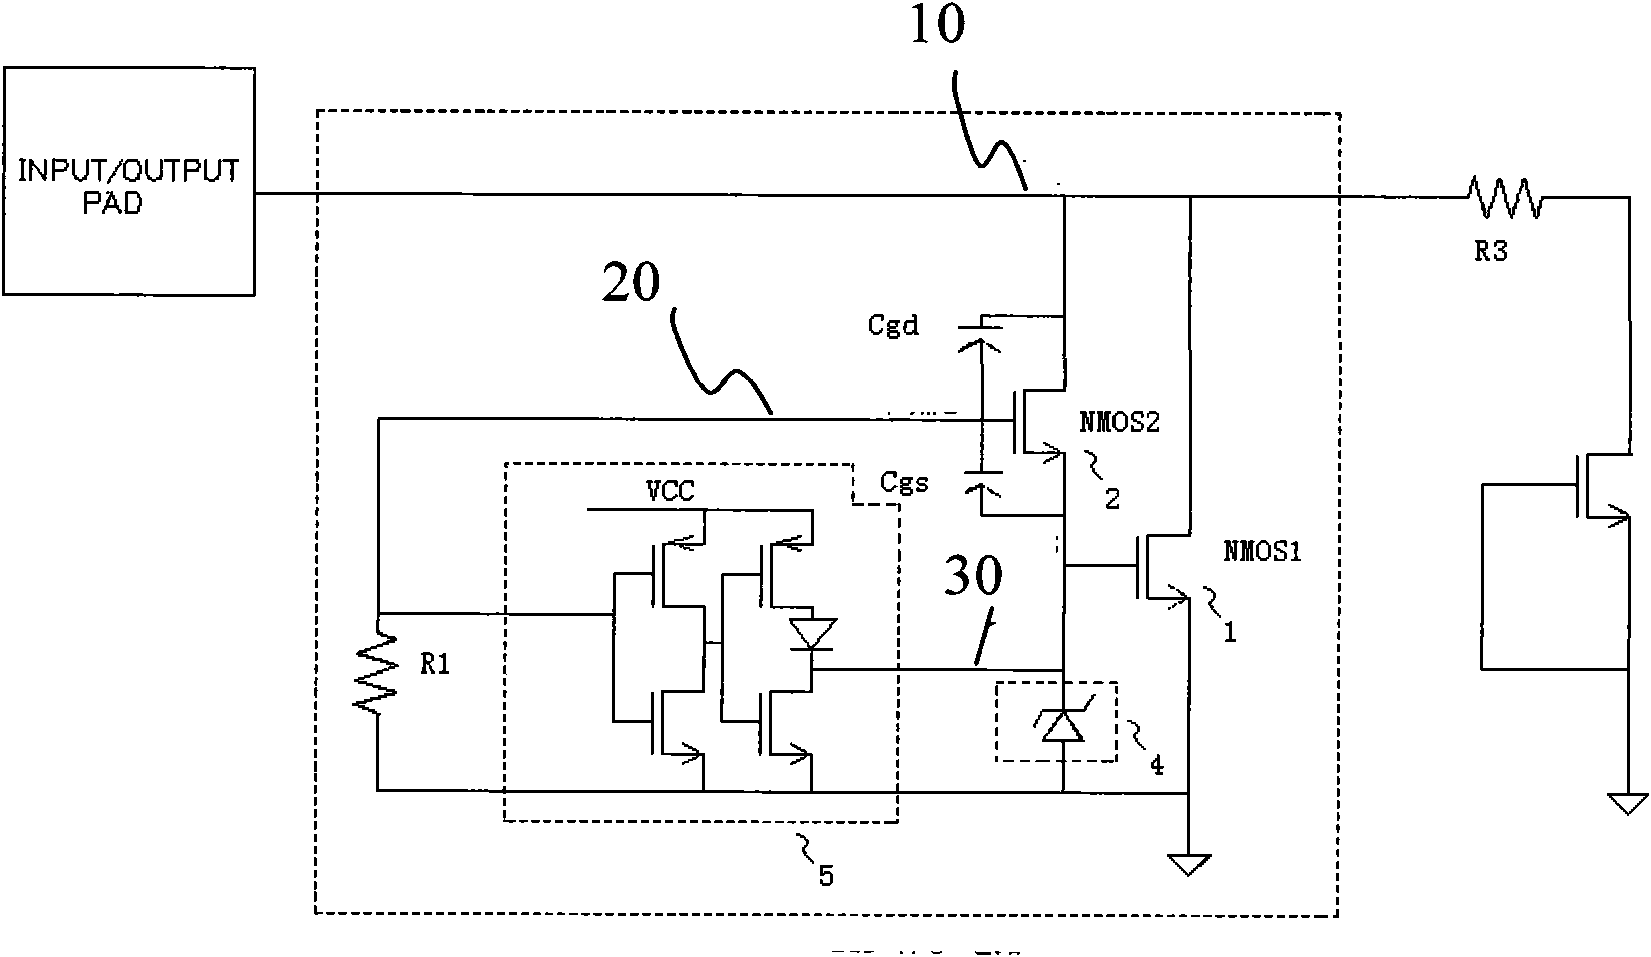 High-voltage ESD (Electronic Static Discharge) protection circuit